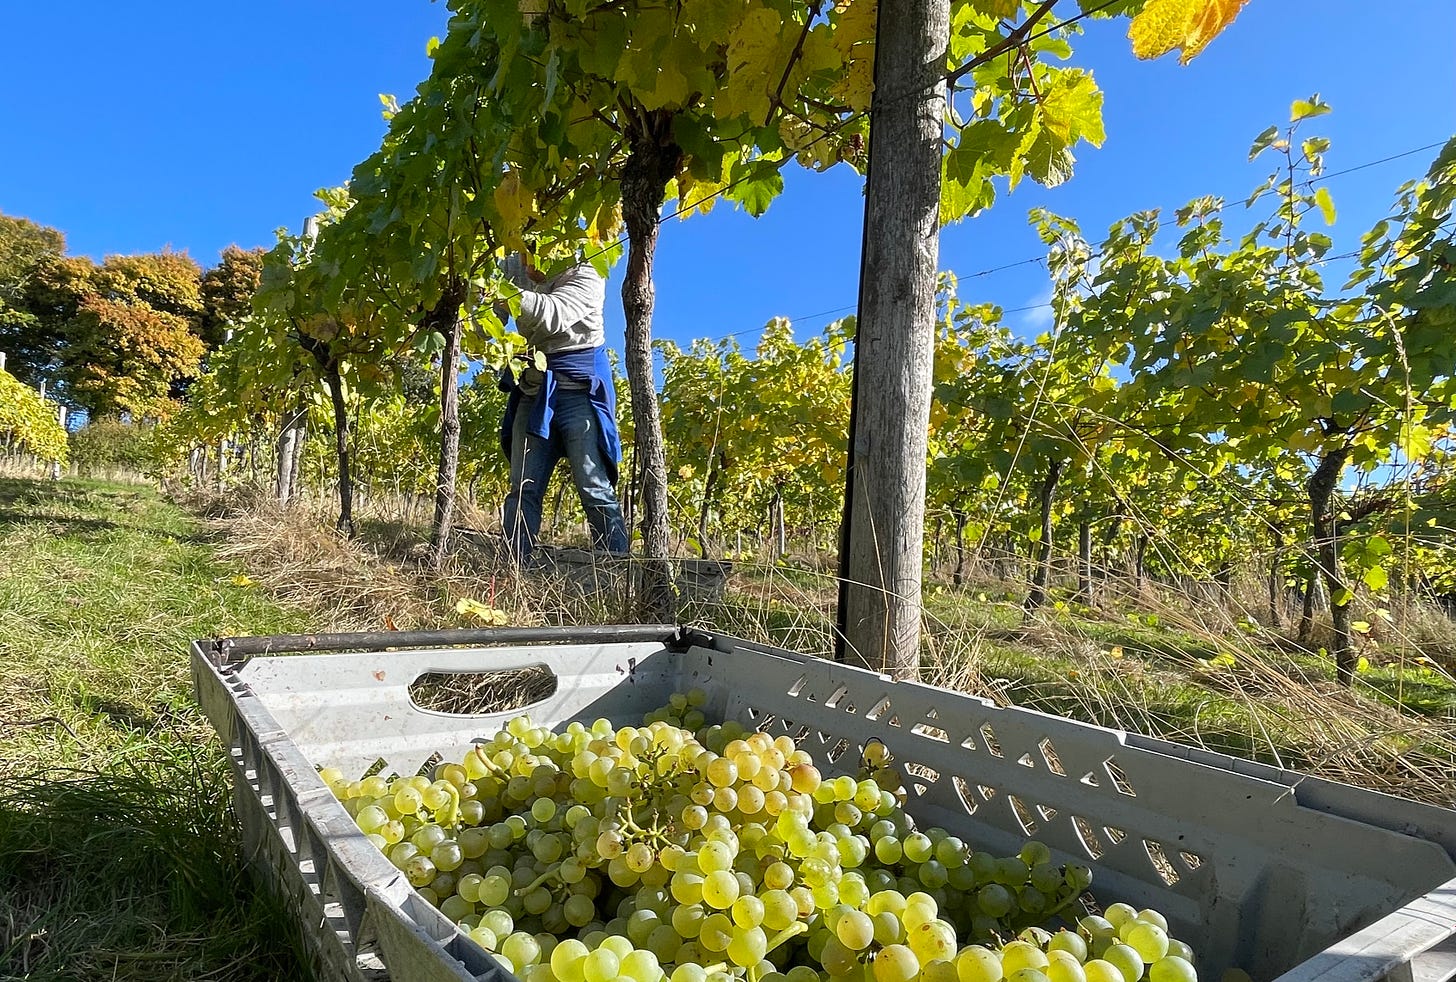 A punnet of grapes being harvested